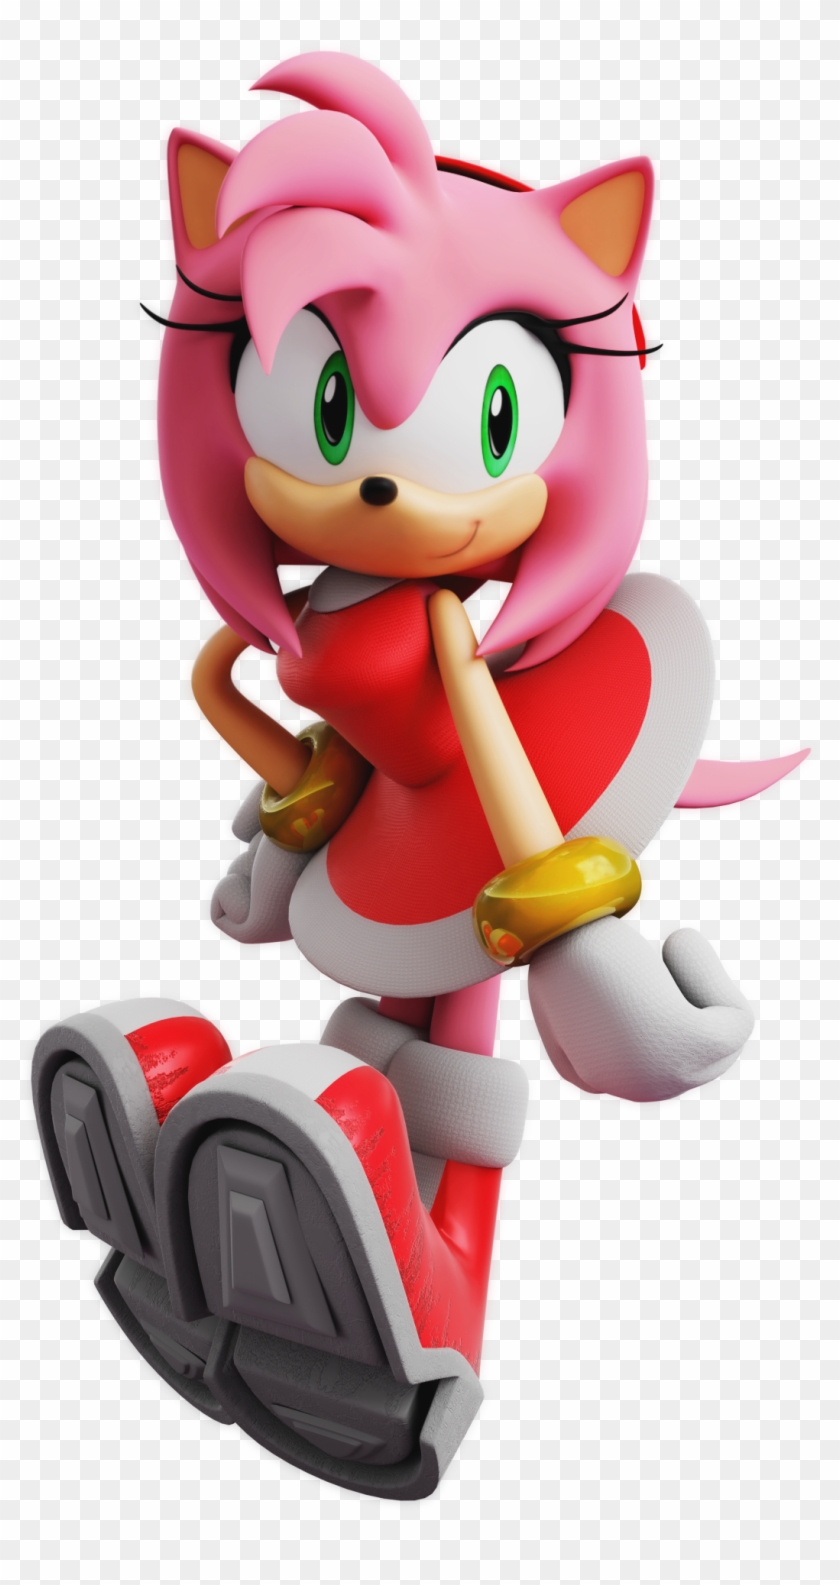 Sonic Adventure Amy Rose Cartoon Figurine Toy Product - Sonic Amy Rose Fanart Clipart #1610330